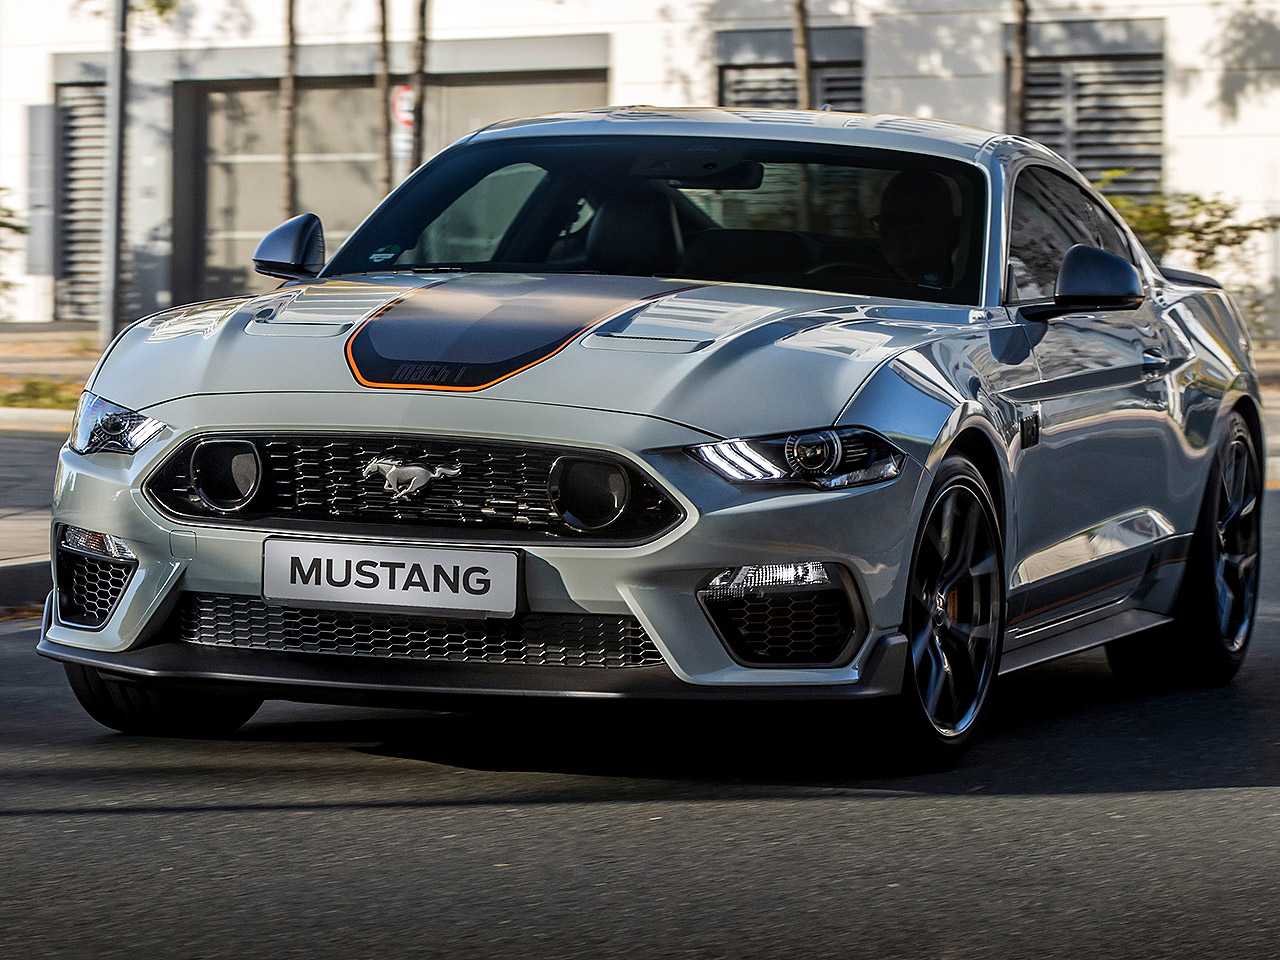 Ford Mustang